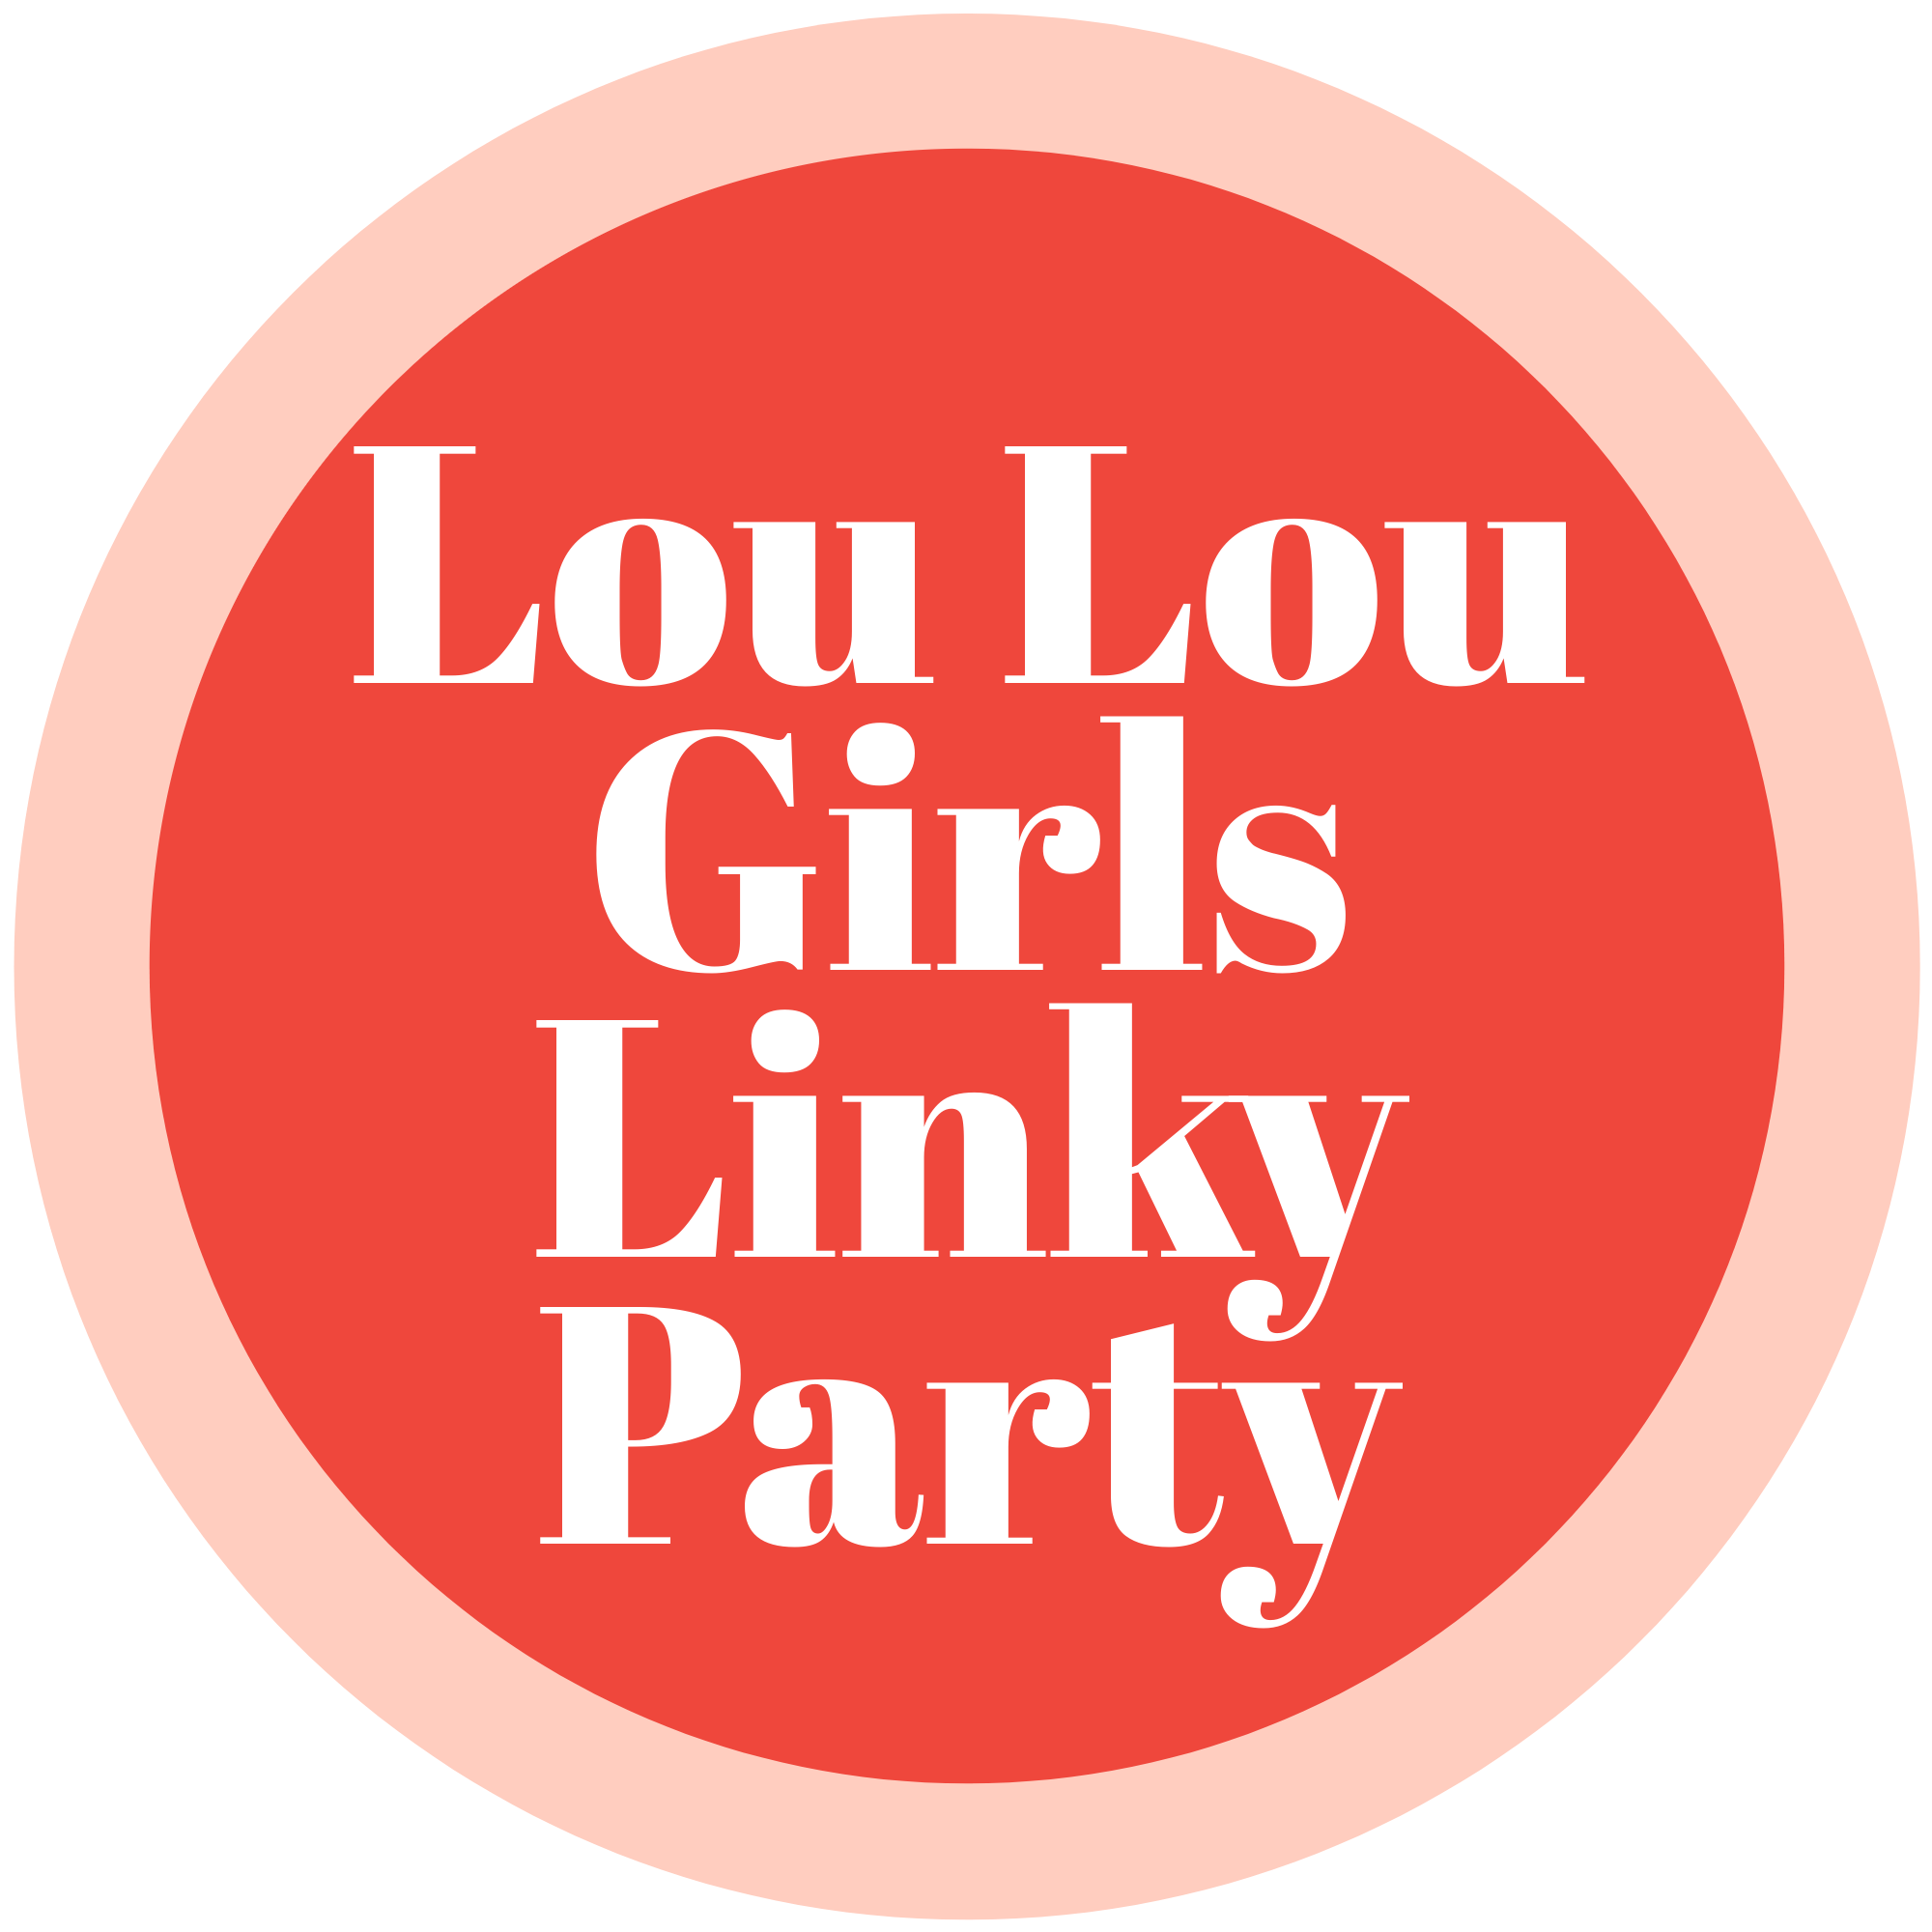 lou-lou-girls-linky-party.png